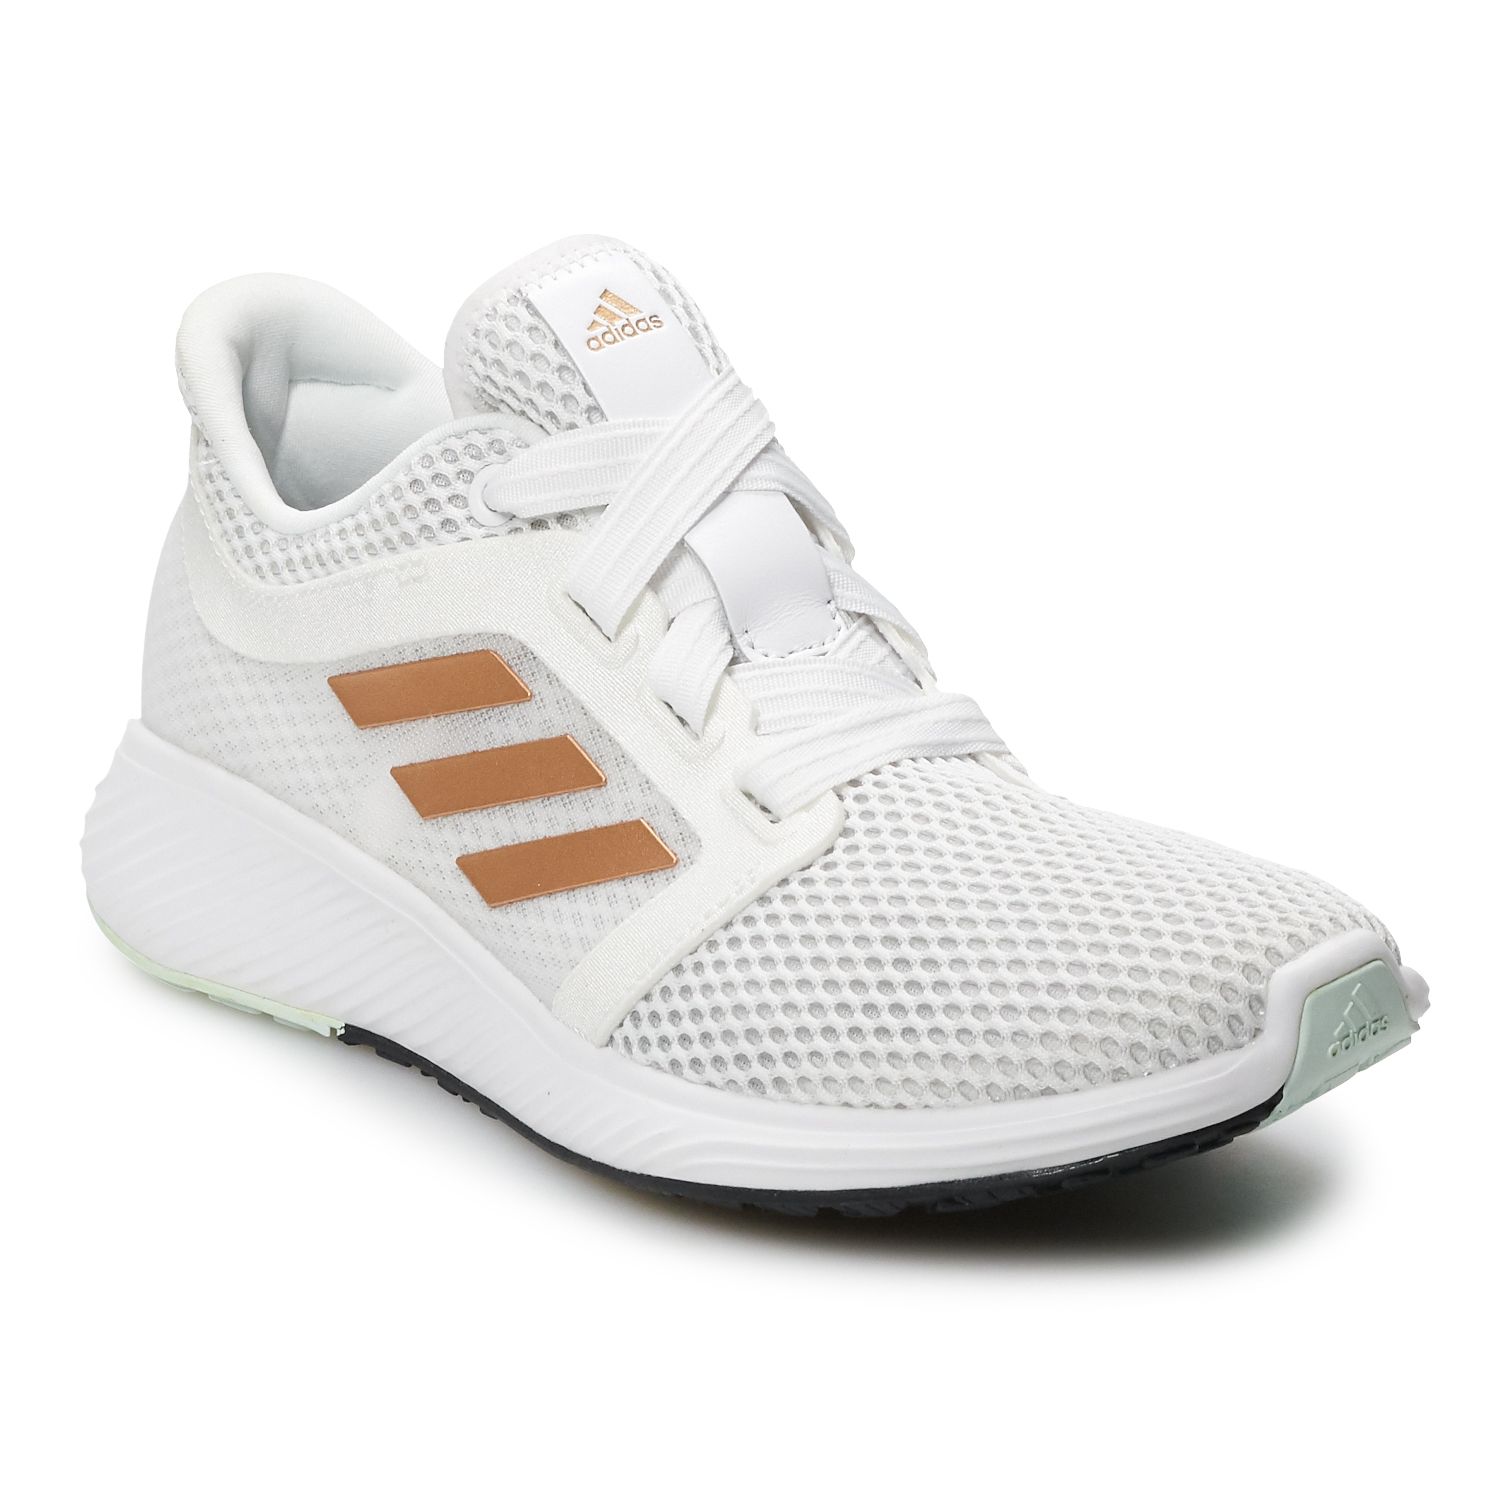 adidas edge lux 3 women's running shoes reviews